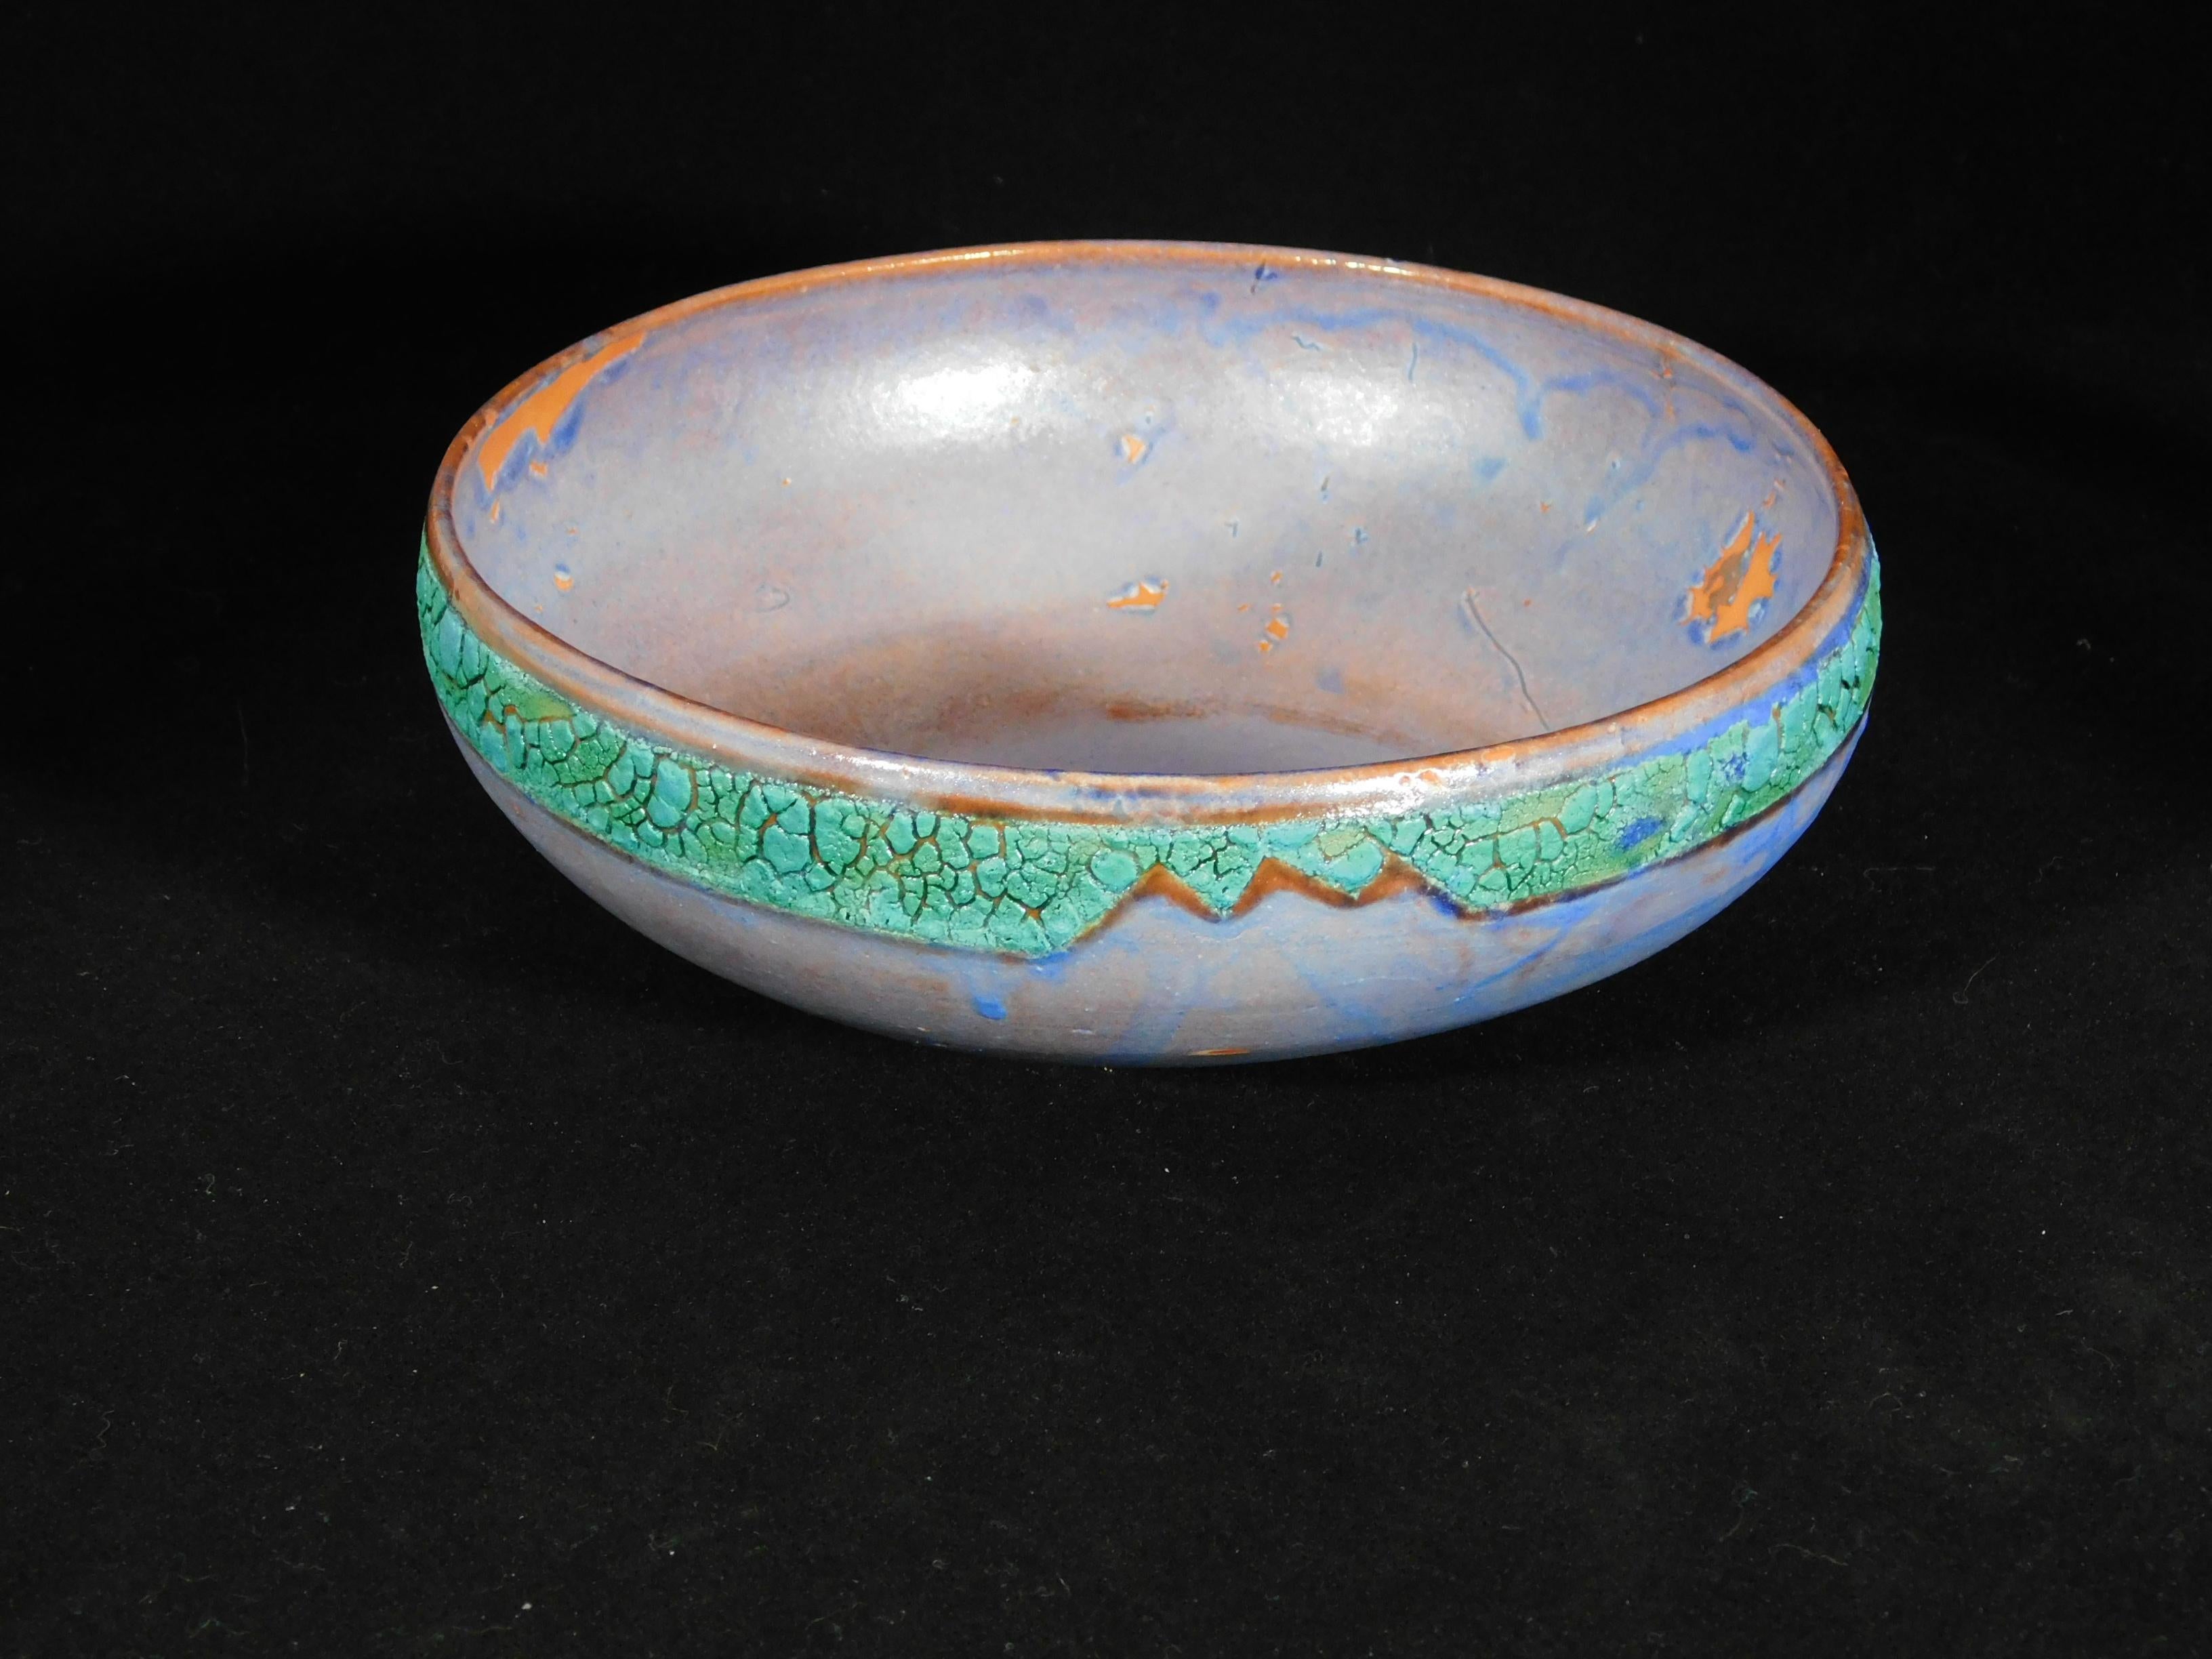 Voltaire wheel thrown earthenware bowl by ceramicist Andrew Wilder.
This is a one of a kind object made in the ancient way- by hand in a small artisanal pottery. In this series Wilder explores the application of lichen under glazes to achieve